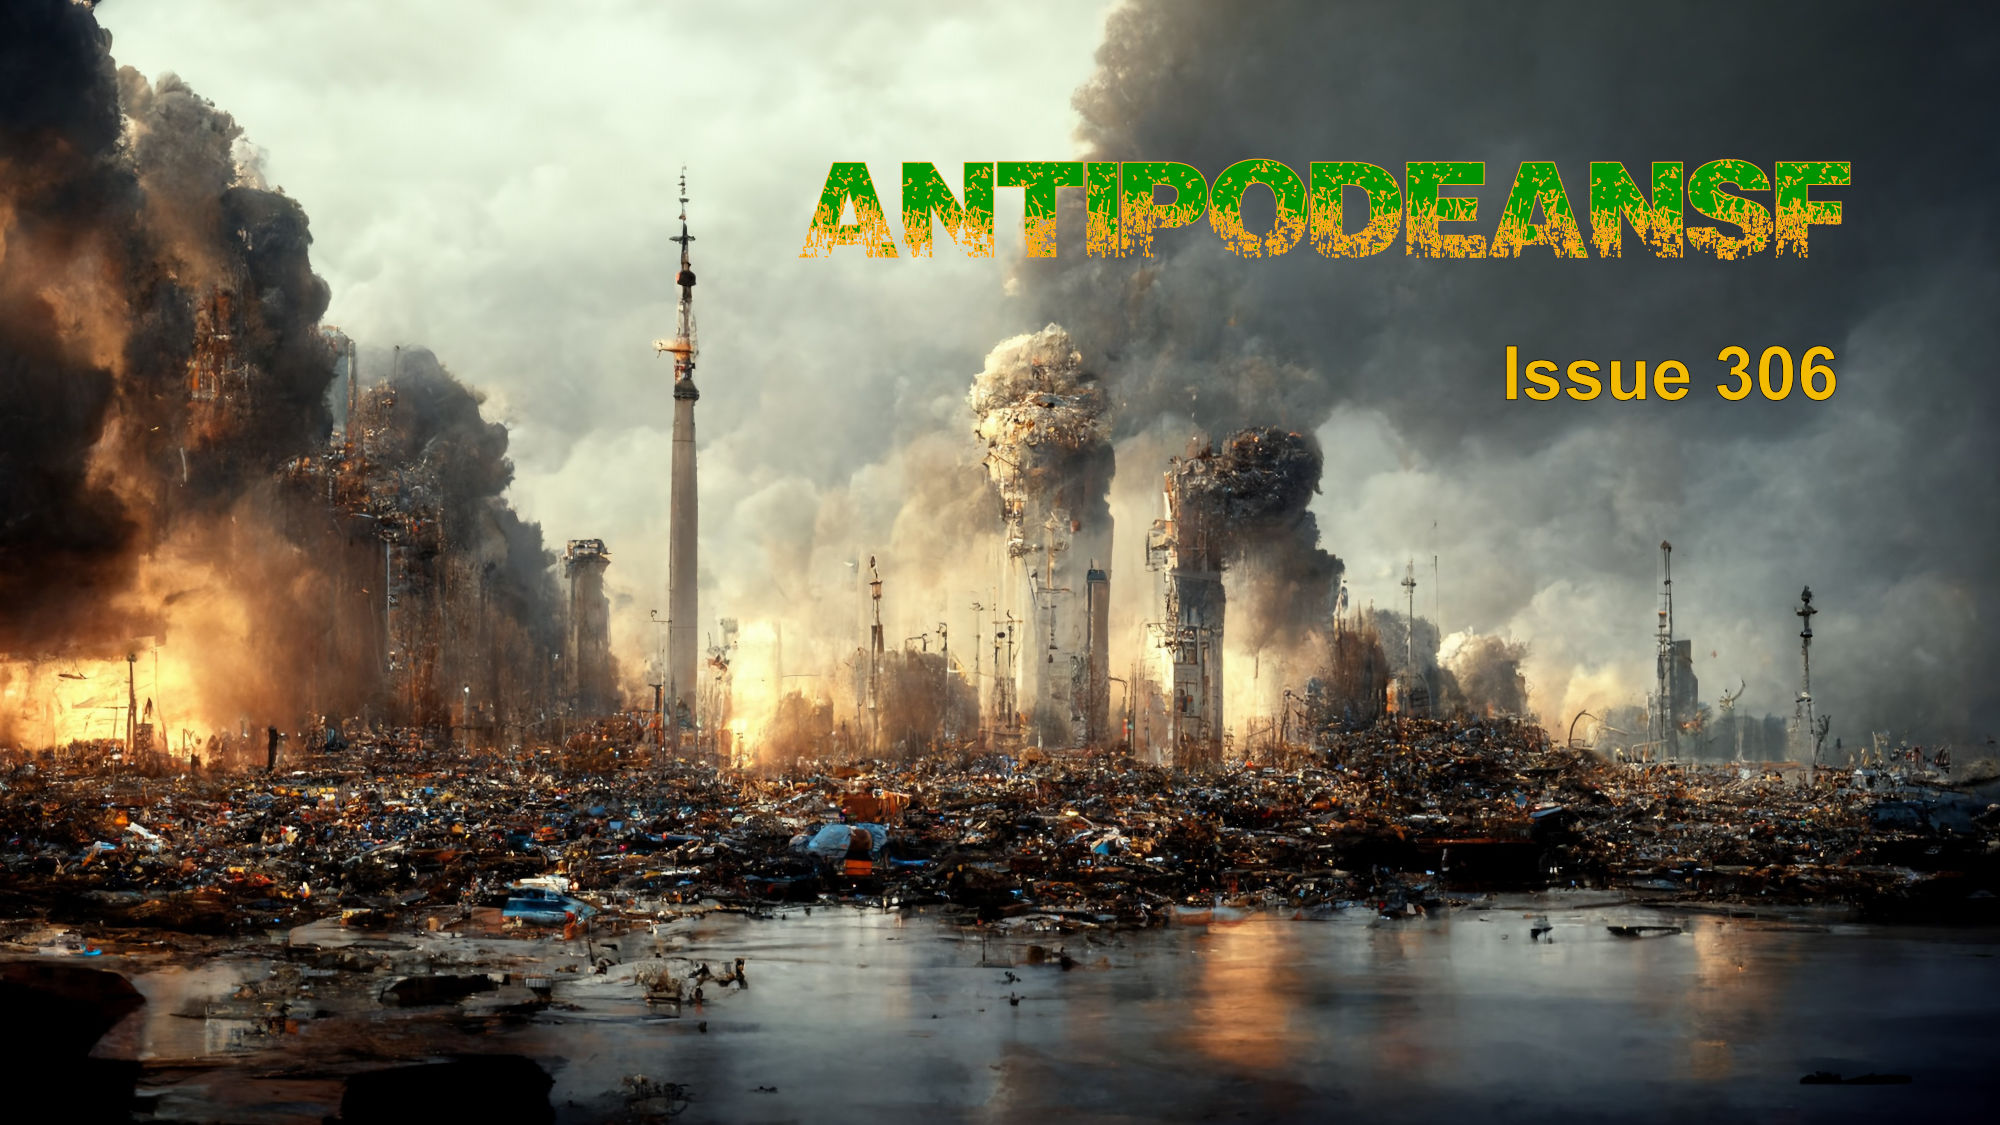 AntipodeanSF Issue 306